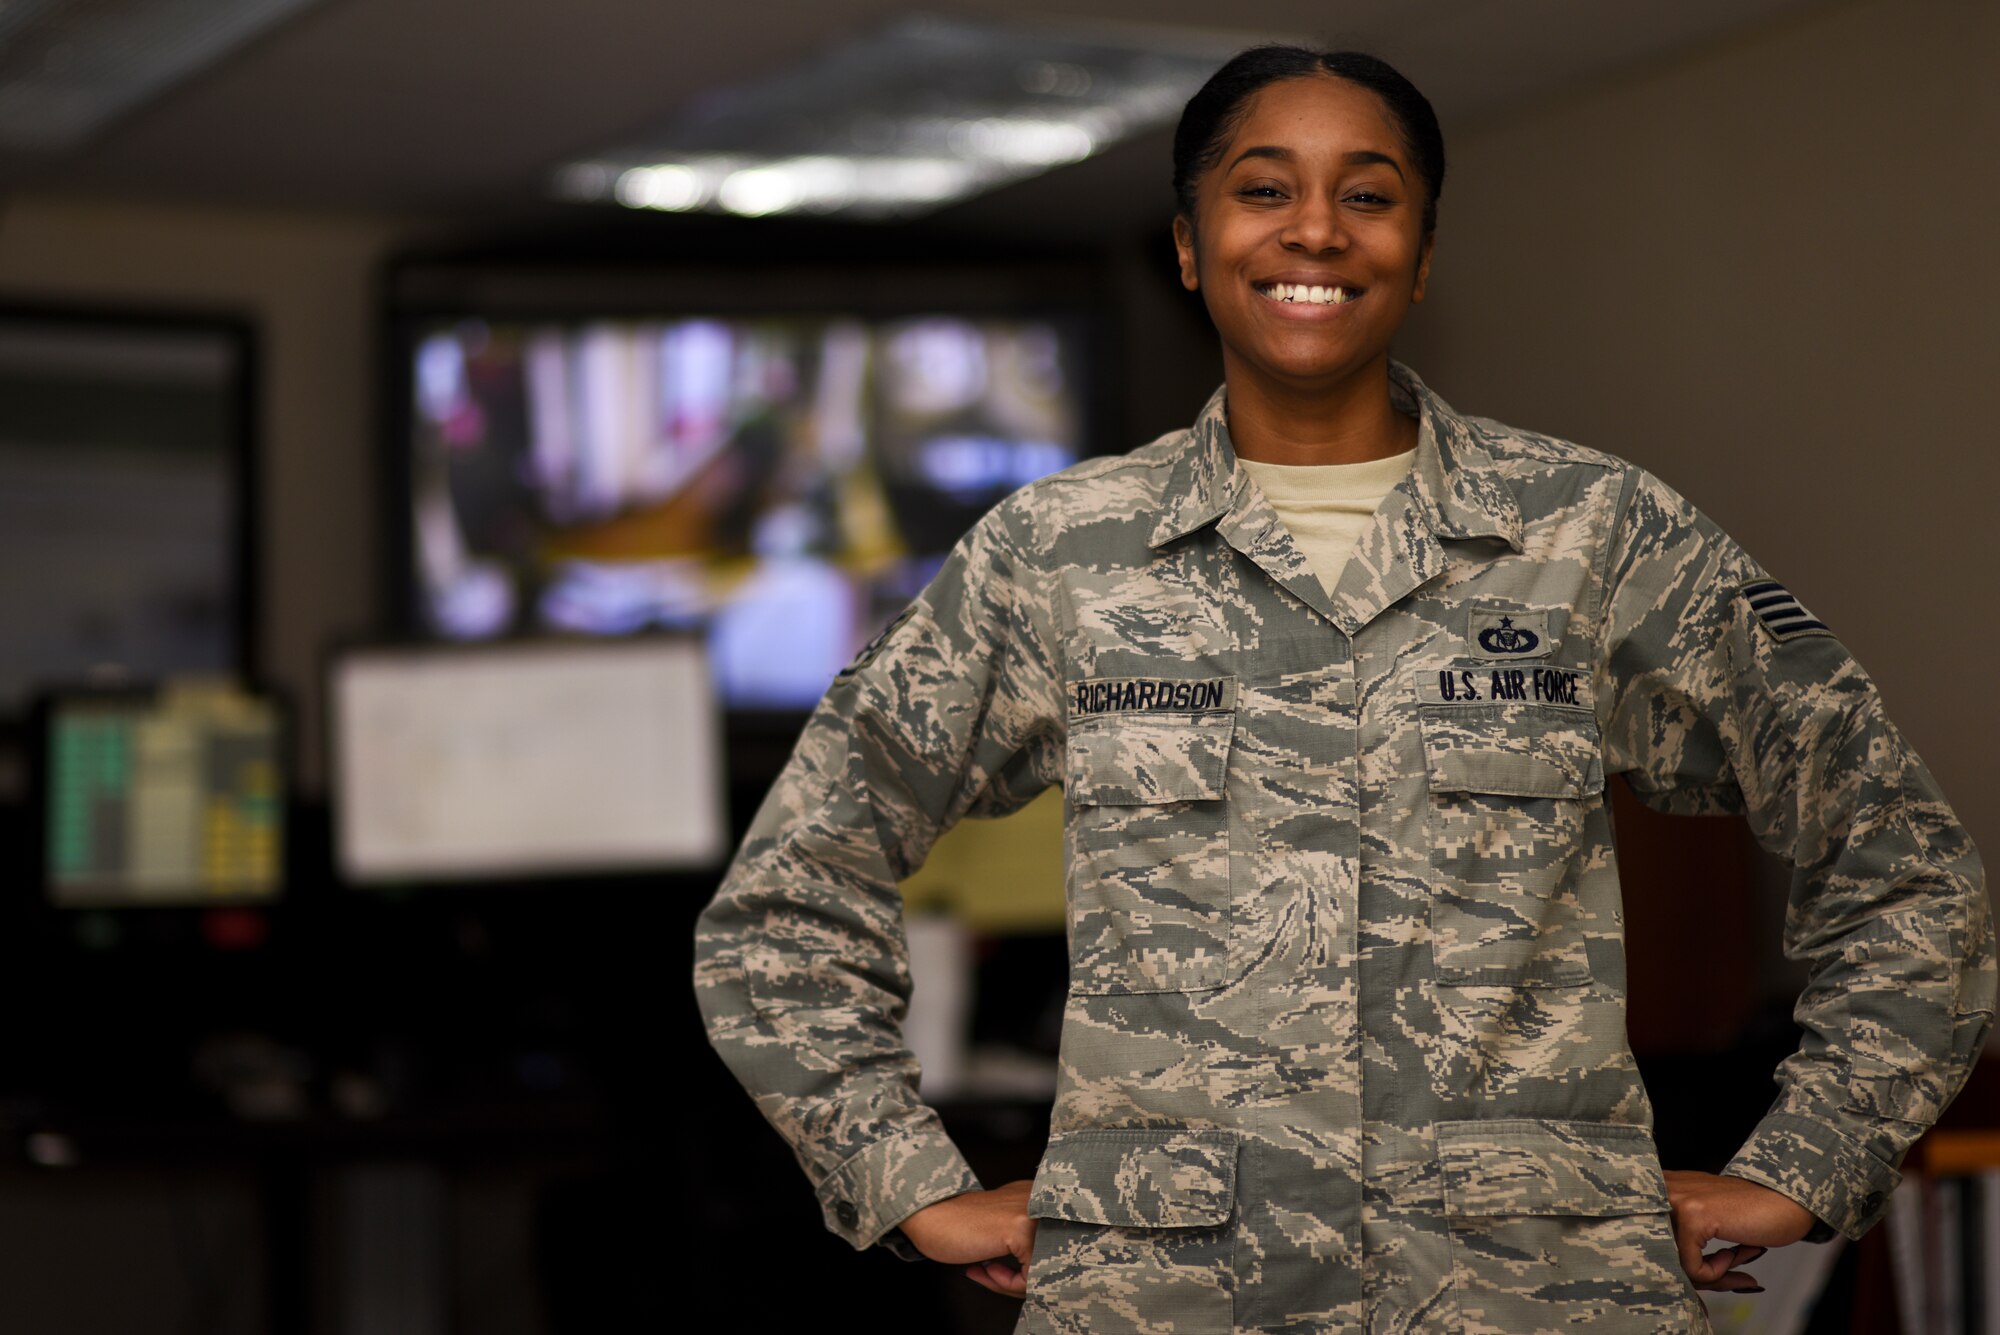 Taking command and control: Command Post NCO handles it all